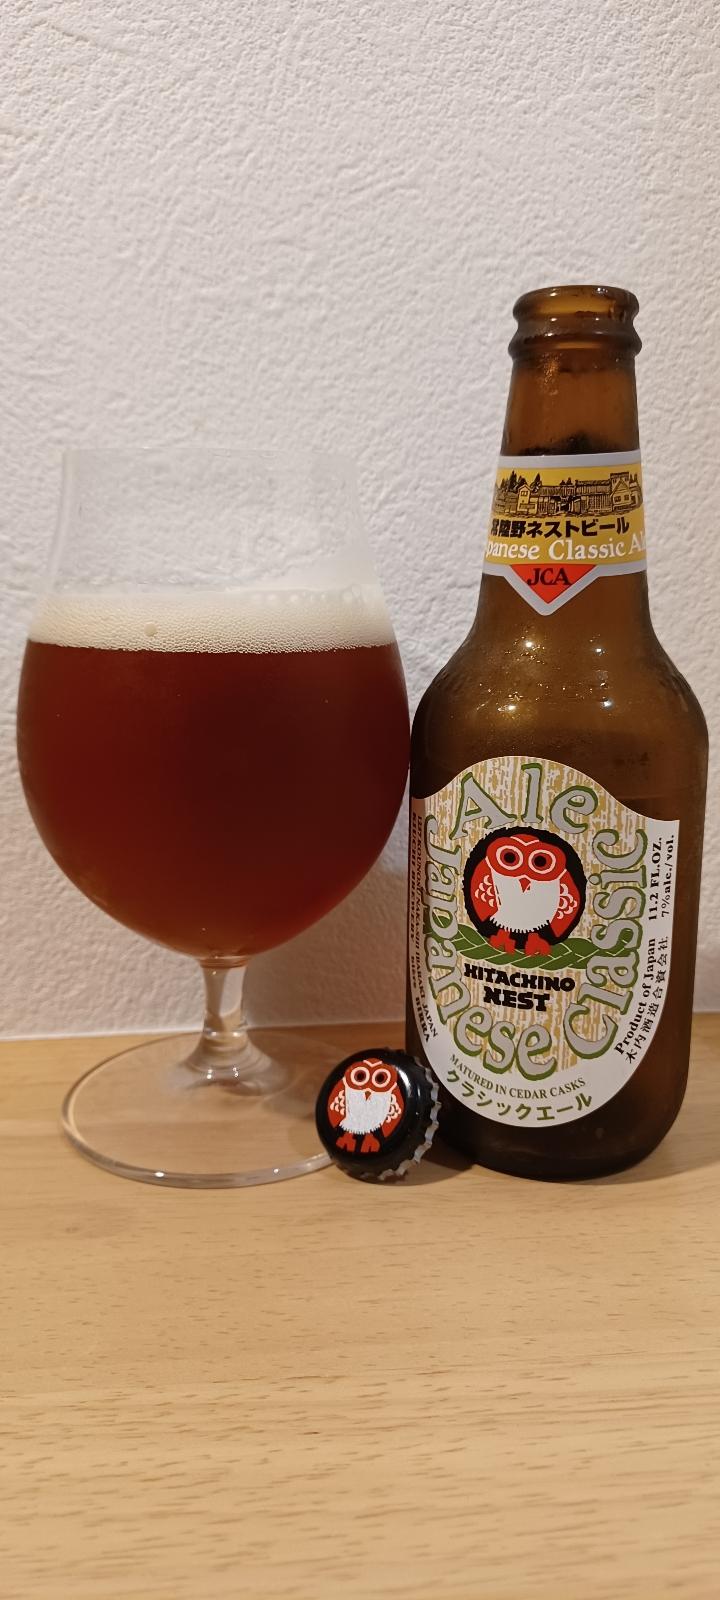 Japanese Classic Ale